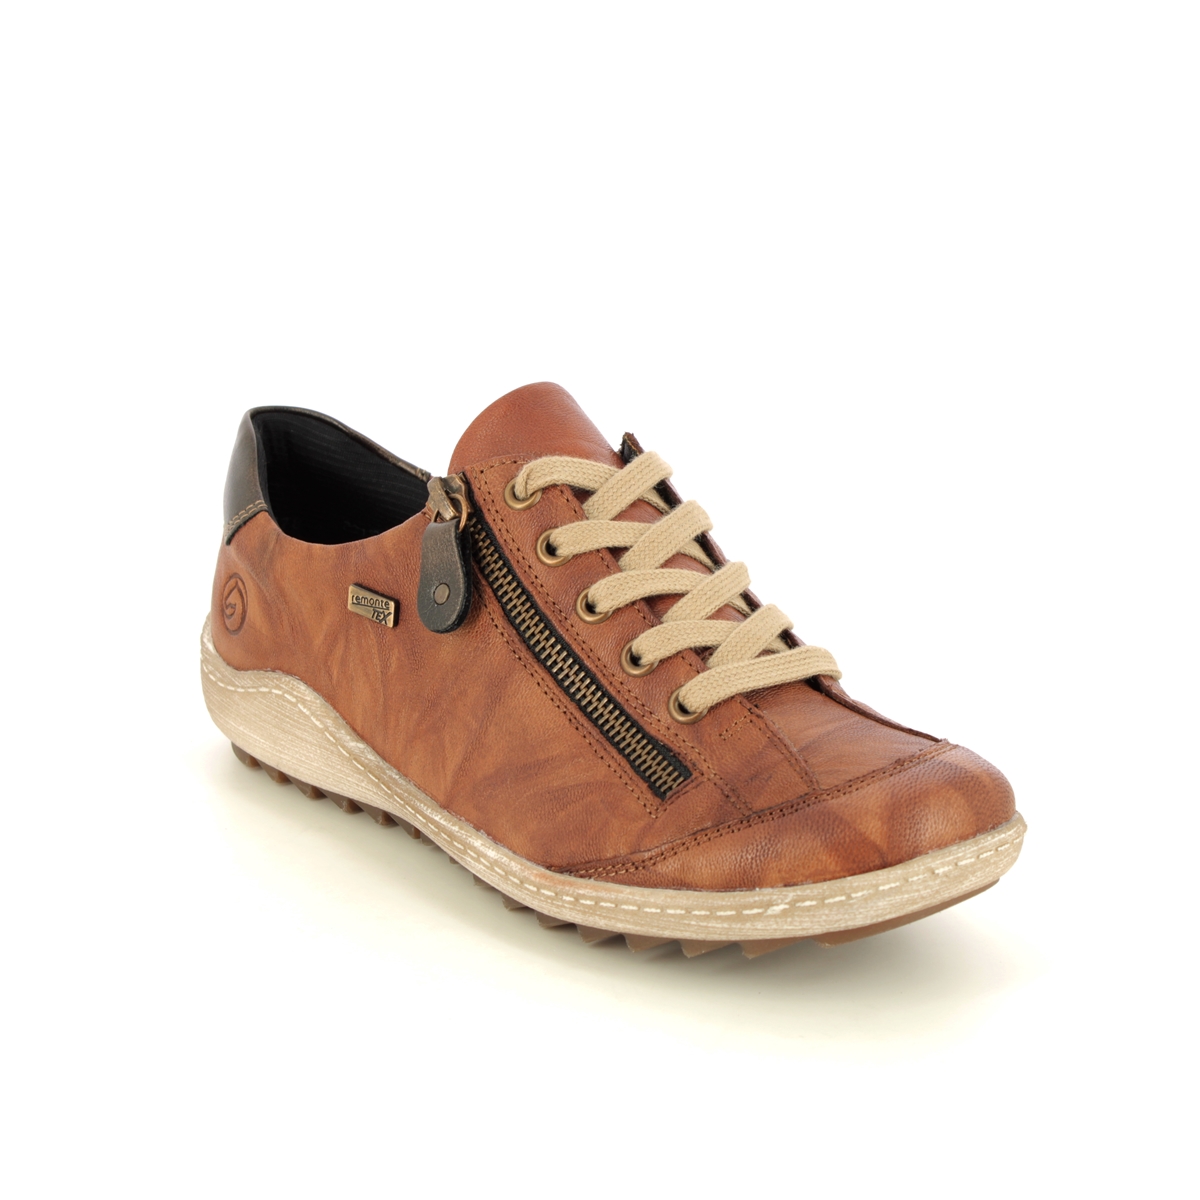 Remonte Zigzip 85 Tex Tan Leather Womens Lacing Shoes R1402-22 In Size 37 In Plain Tan Leather